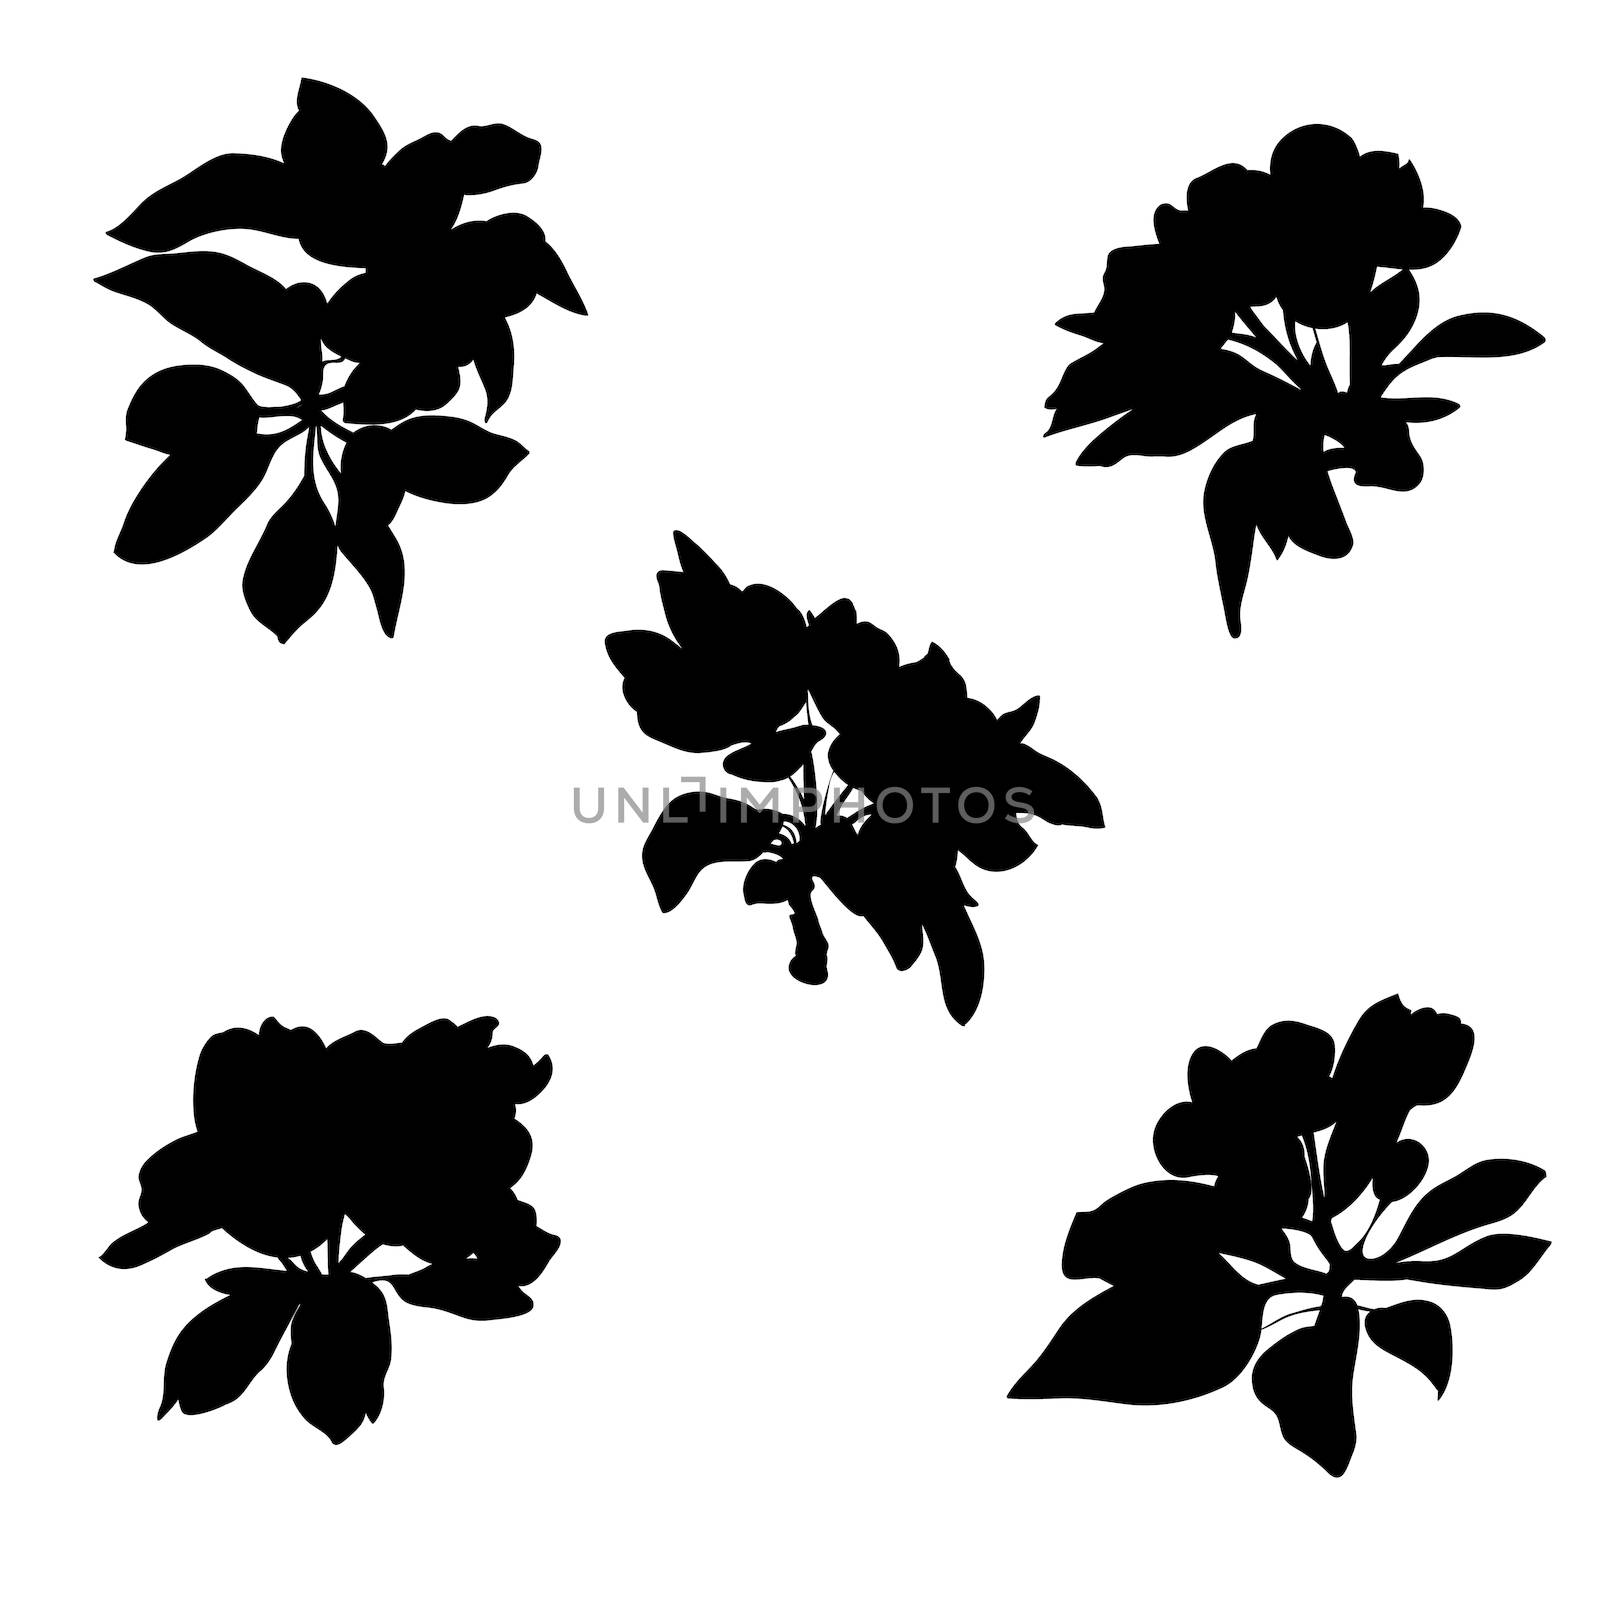 apple flowers silhouettes by catacos